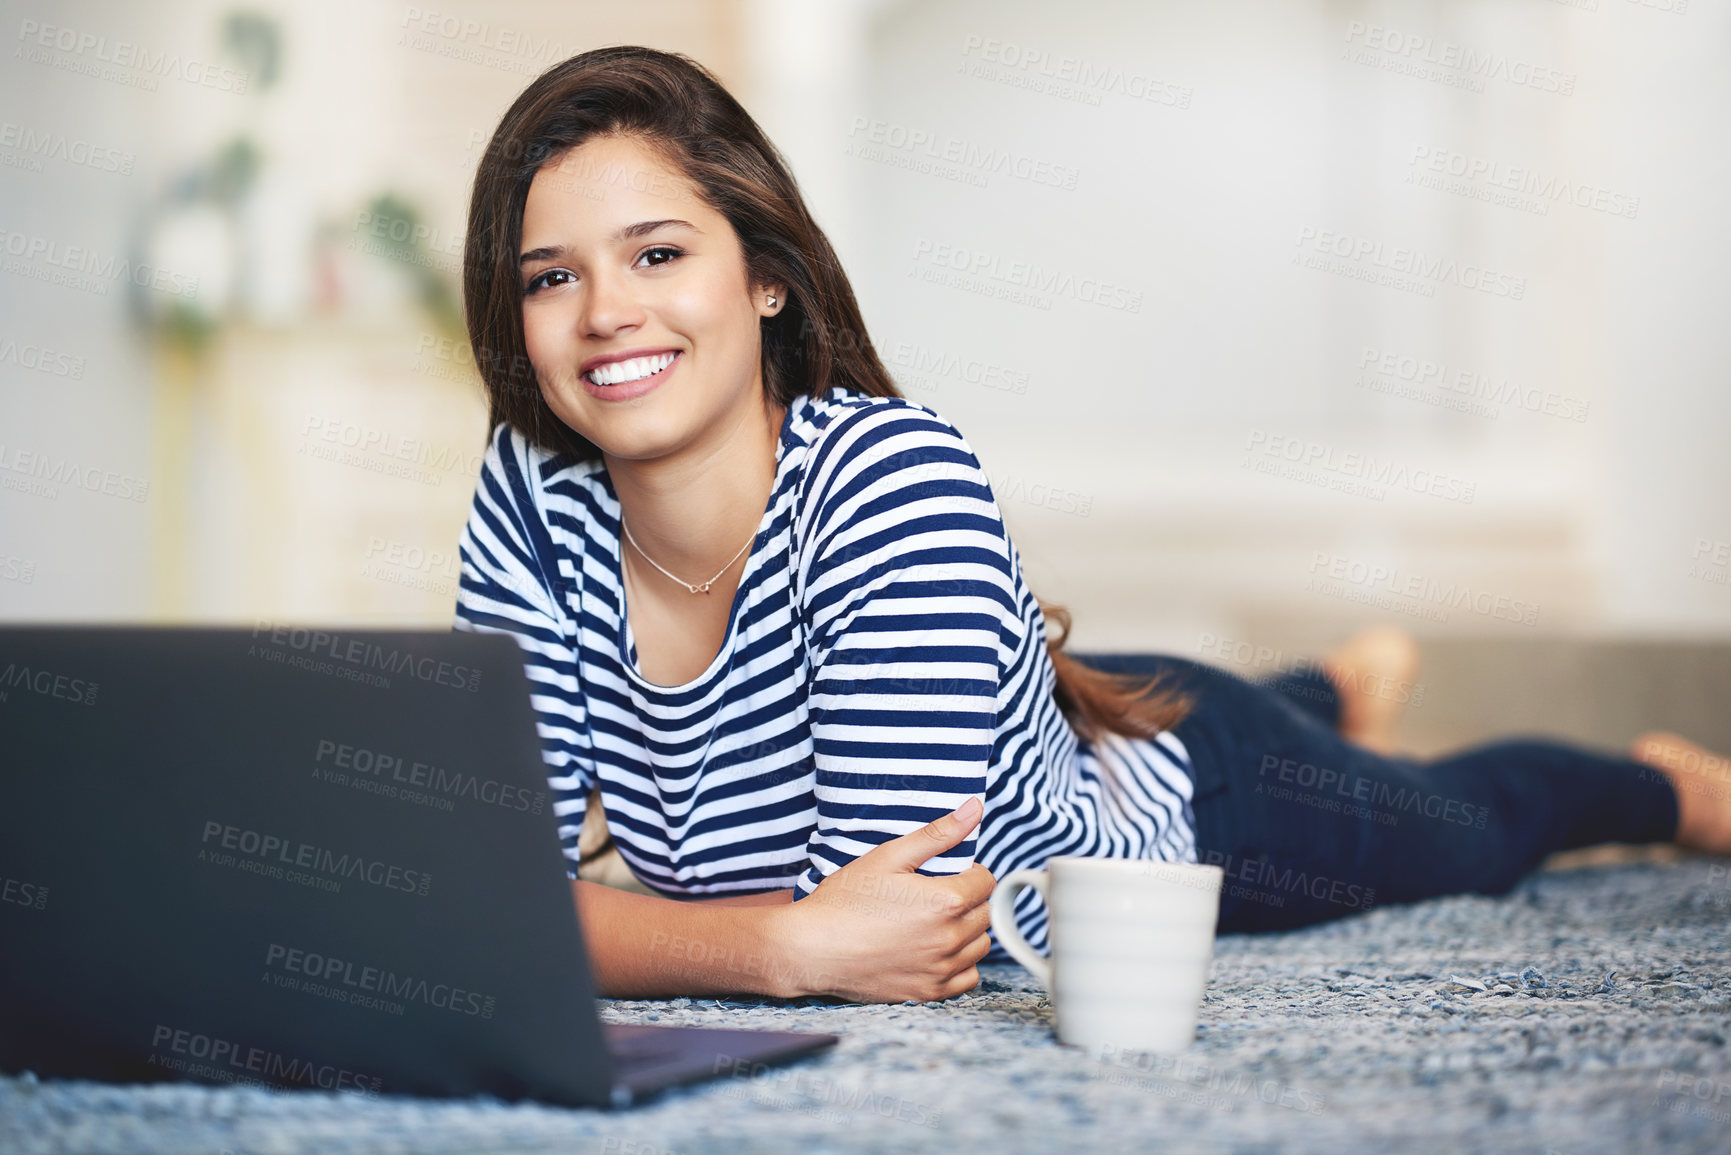 Buy stock photo Portrait of a smiling young woman lying on the floor at home using a laptop